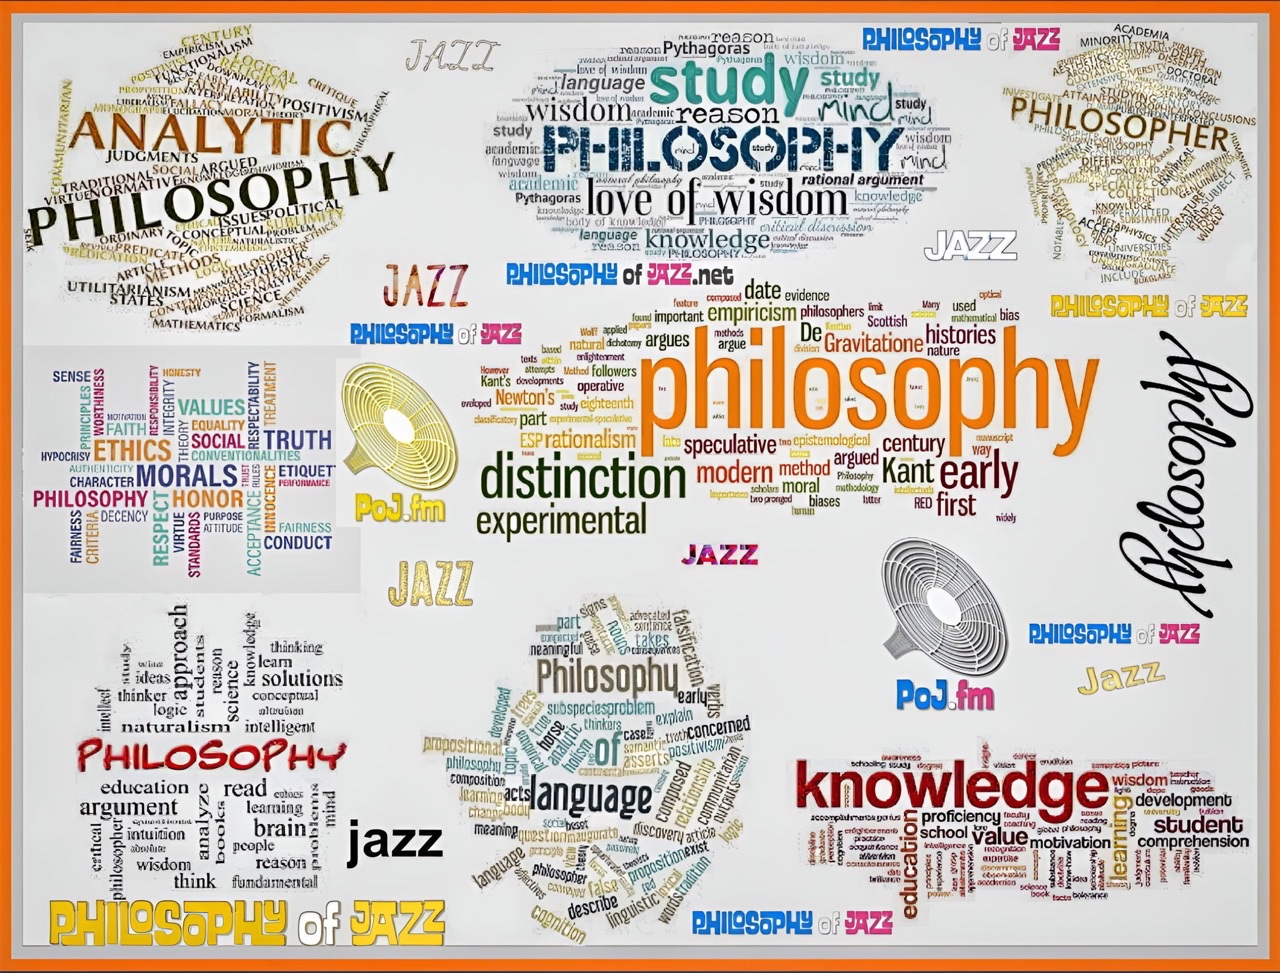 An orange framed composite of eight different multi-colored philosophy word clouds and the word "jazz" in different colors and font styles on a light gray background with PoJ.fm logos.